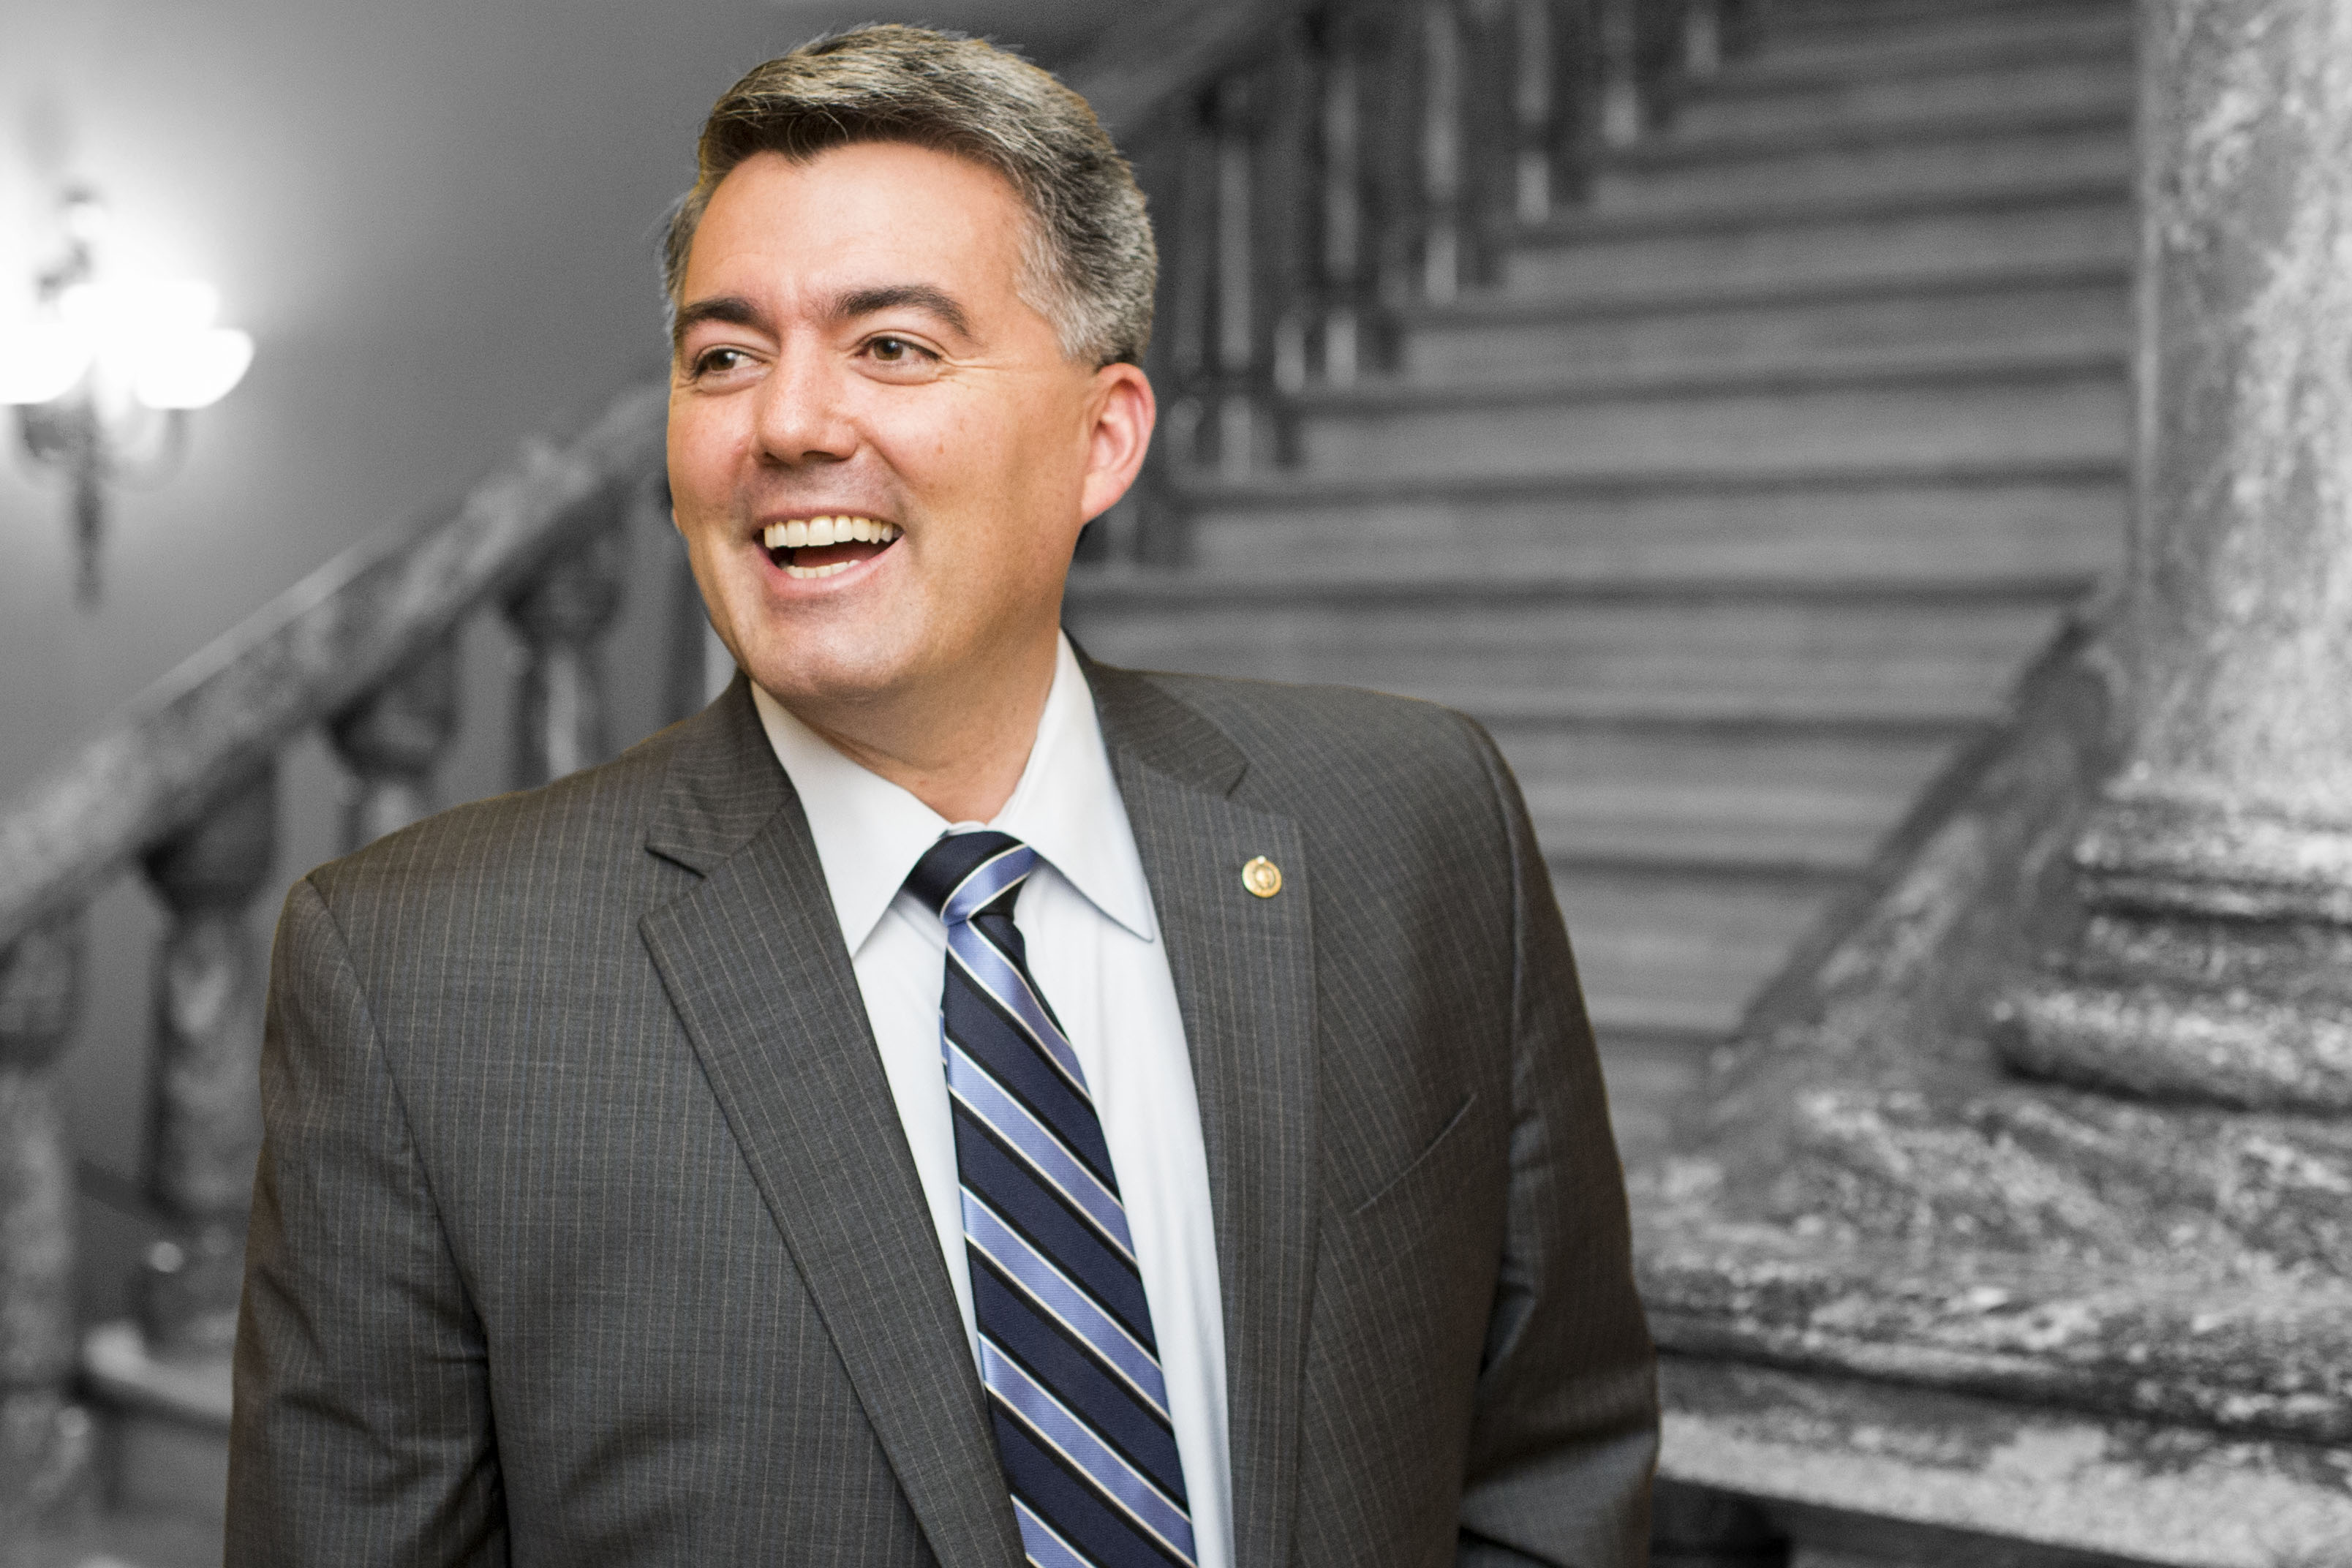 Cory Gardner: 
                              The Colorado Senator showed how Republicans can win in a purple state in 2014 by countering attempts to paint him as unsupportive of women's concerns. When the dust from the GOP primary settles, the eventual presidential candidate may follow his lead.